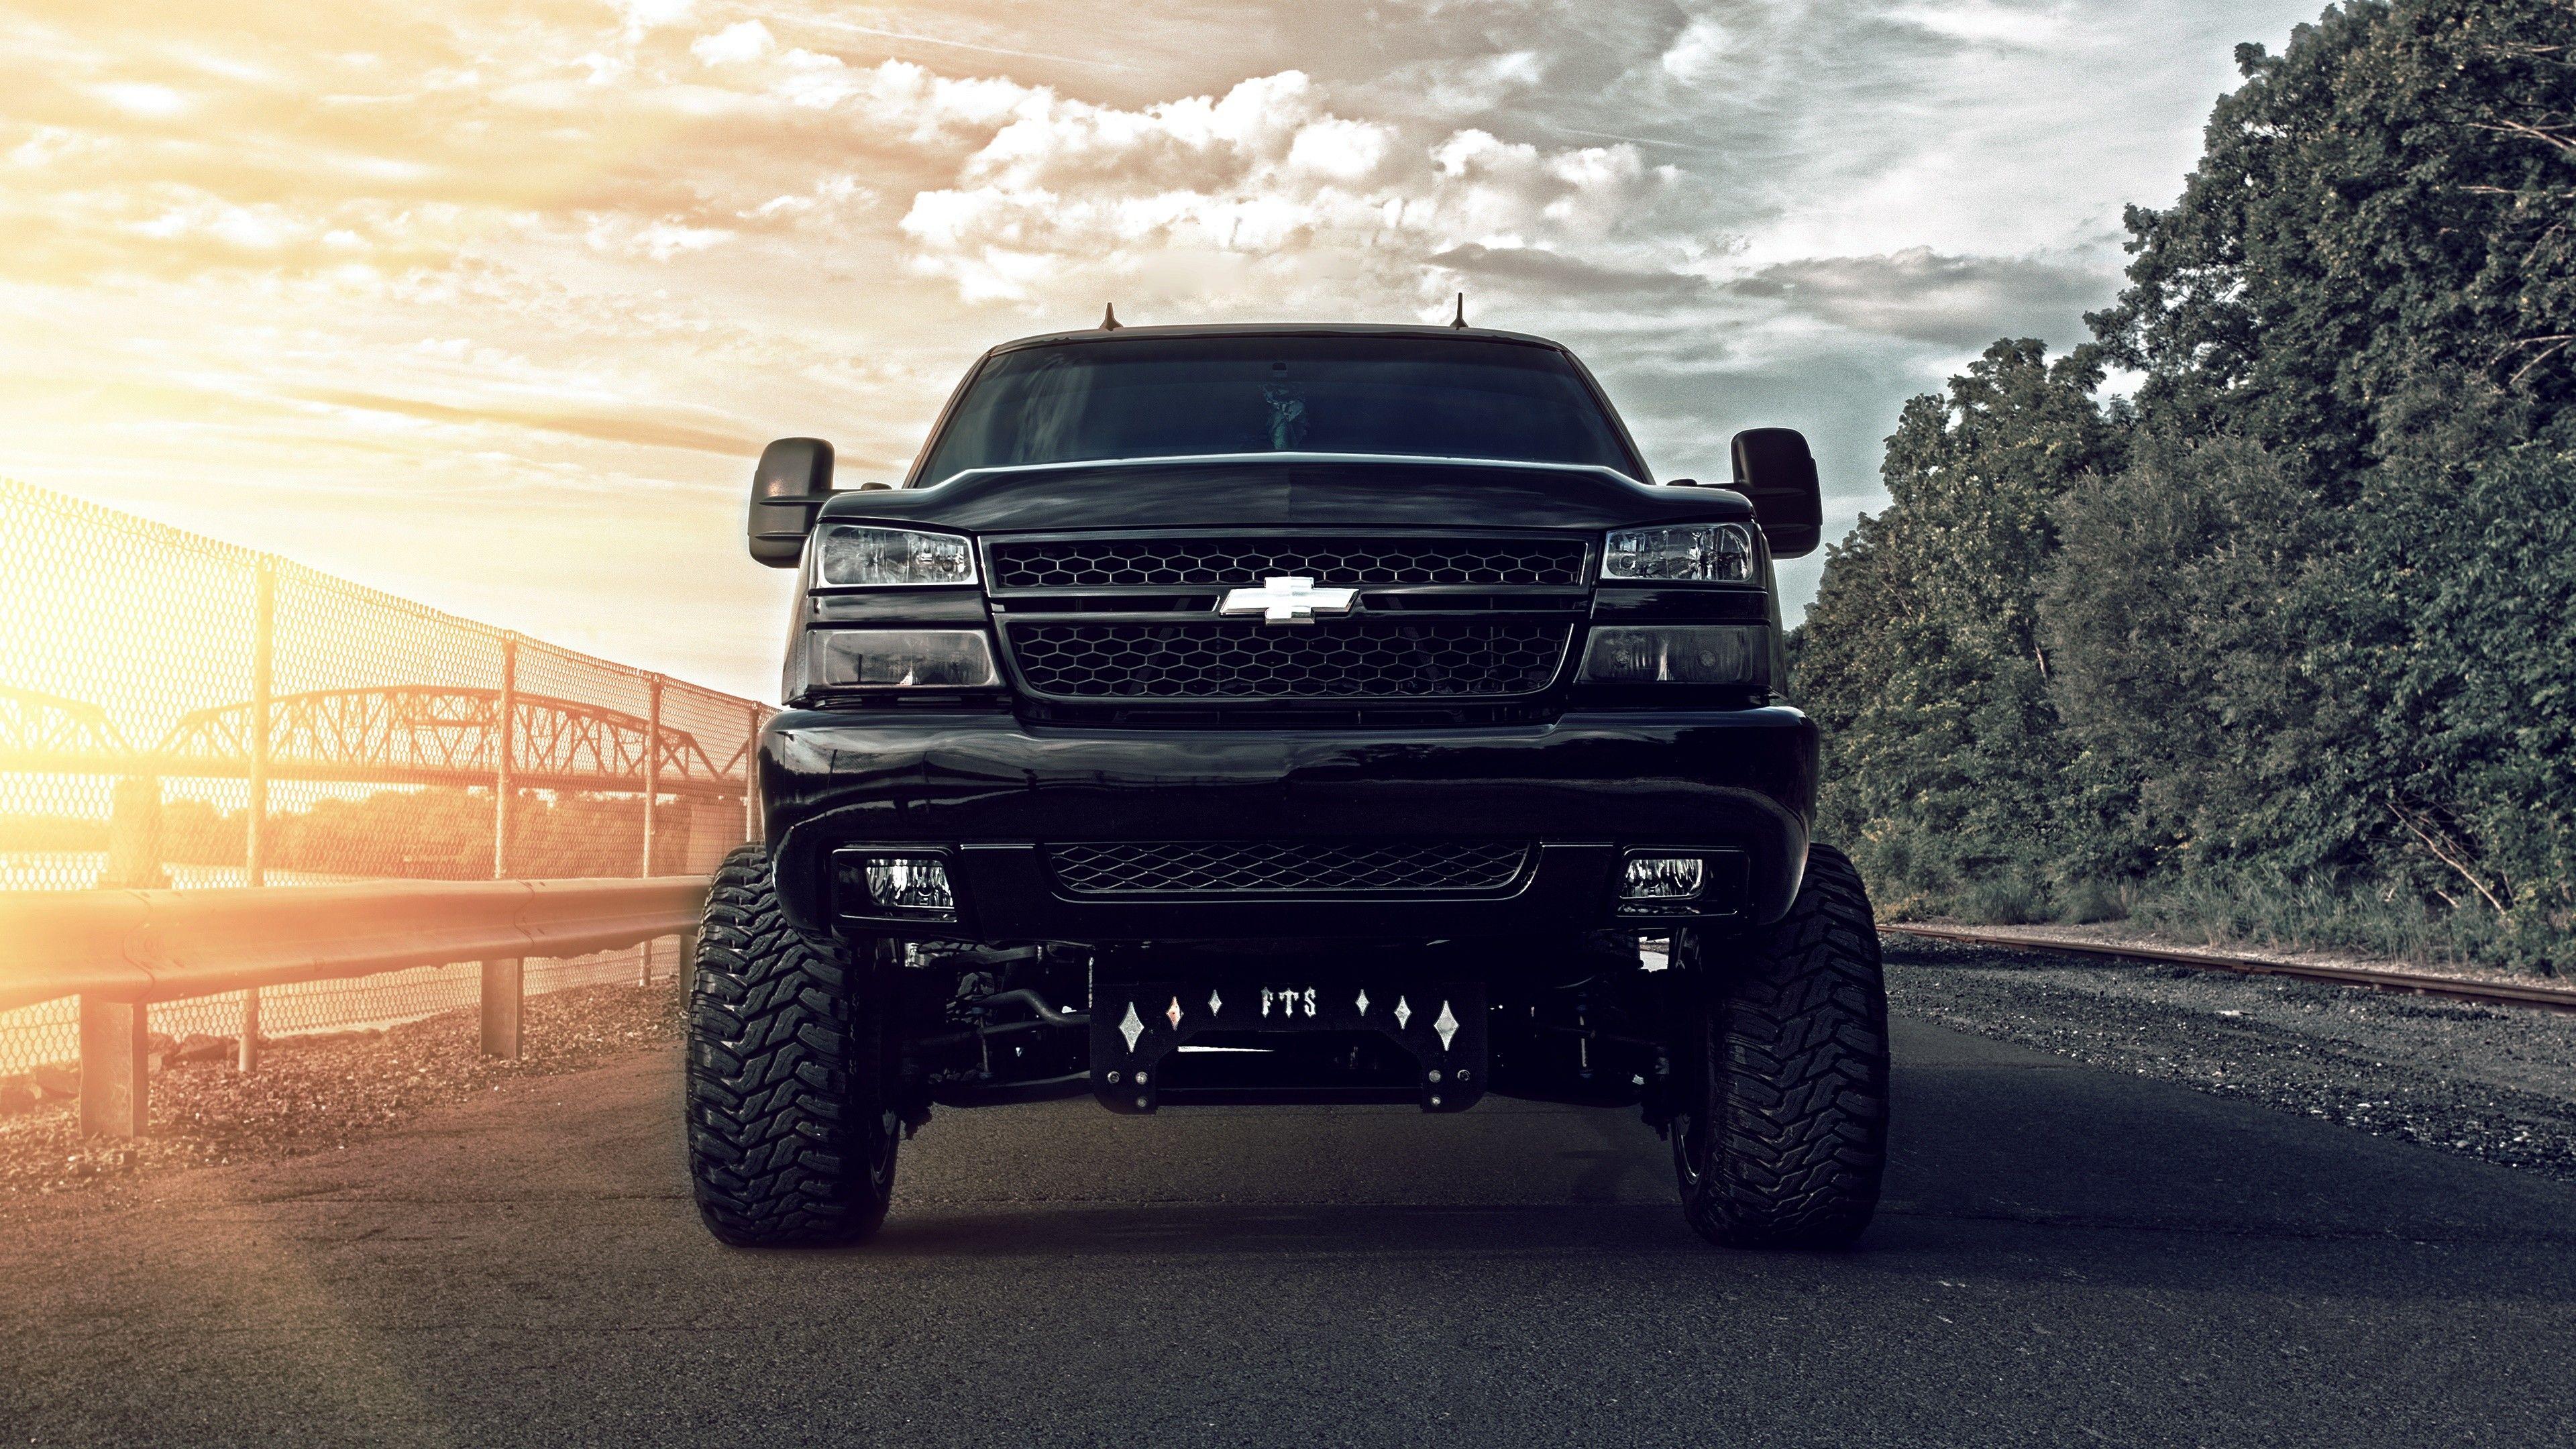 25+ 2017 Chevy Silverado Z71 Full Cab Lifted Truck Wallpaper HD download